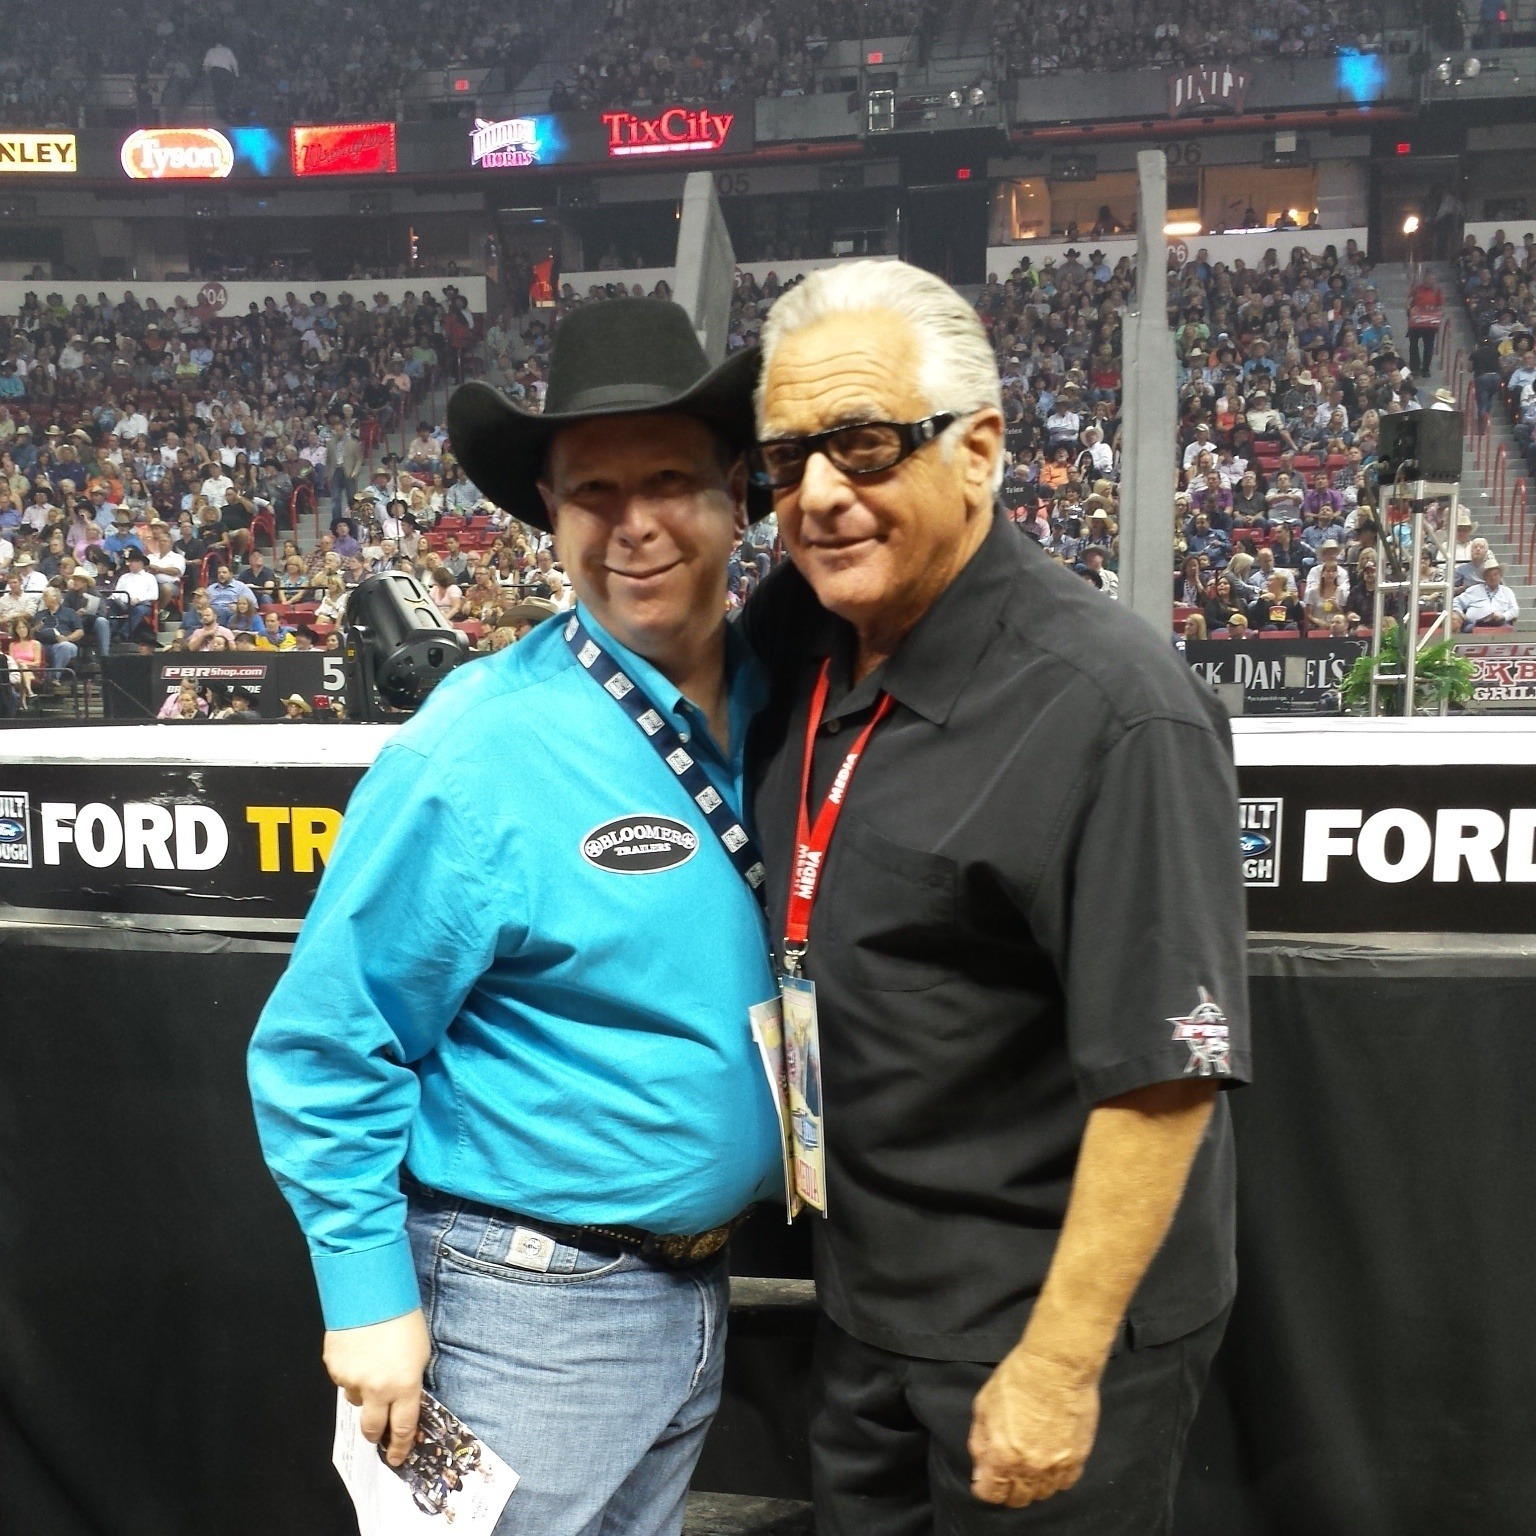 Jason and Barry Weiss